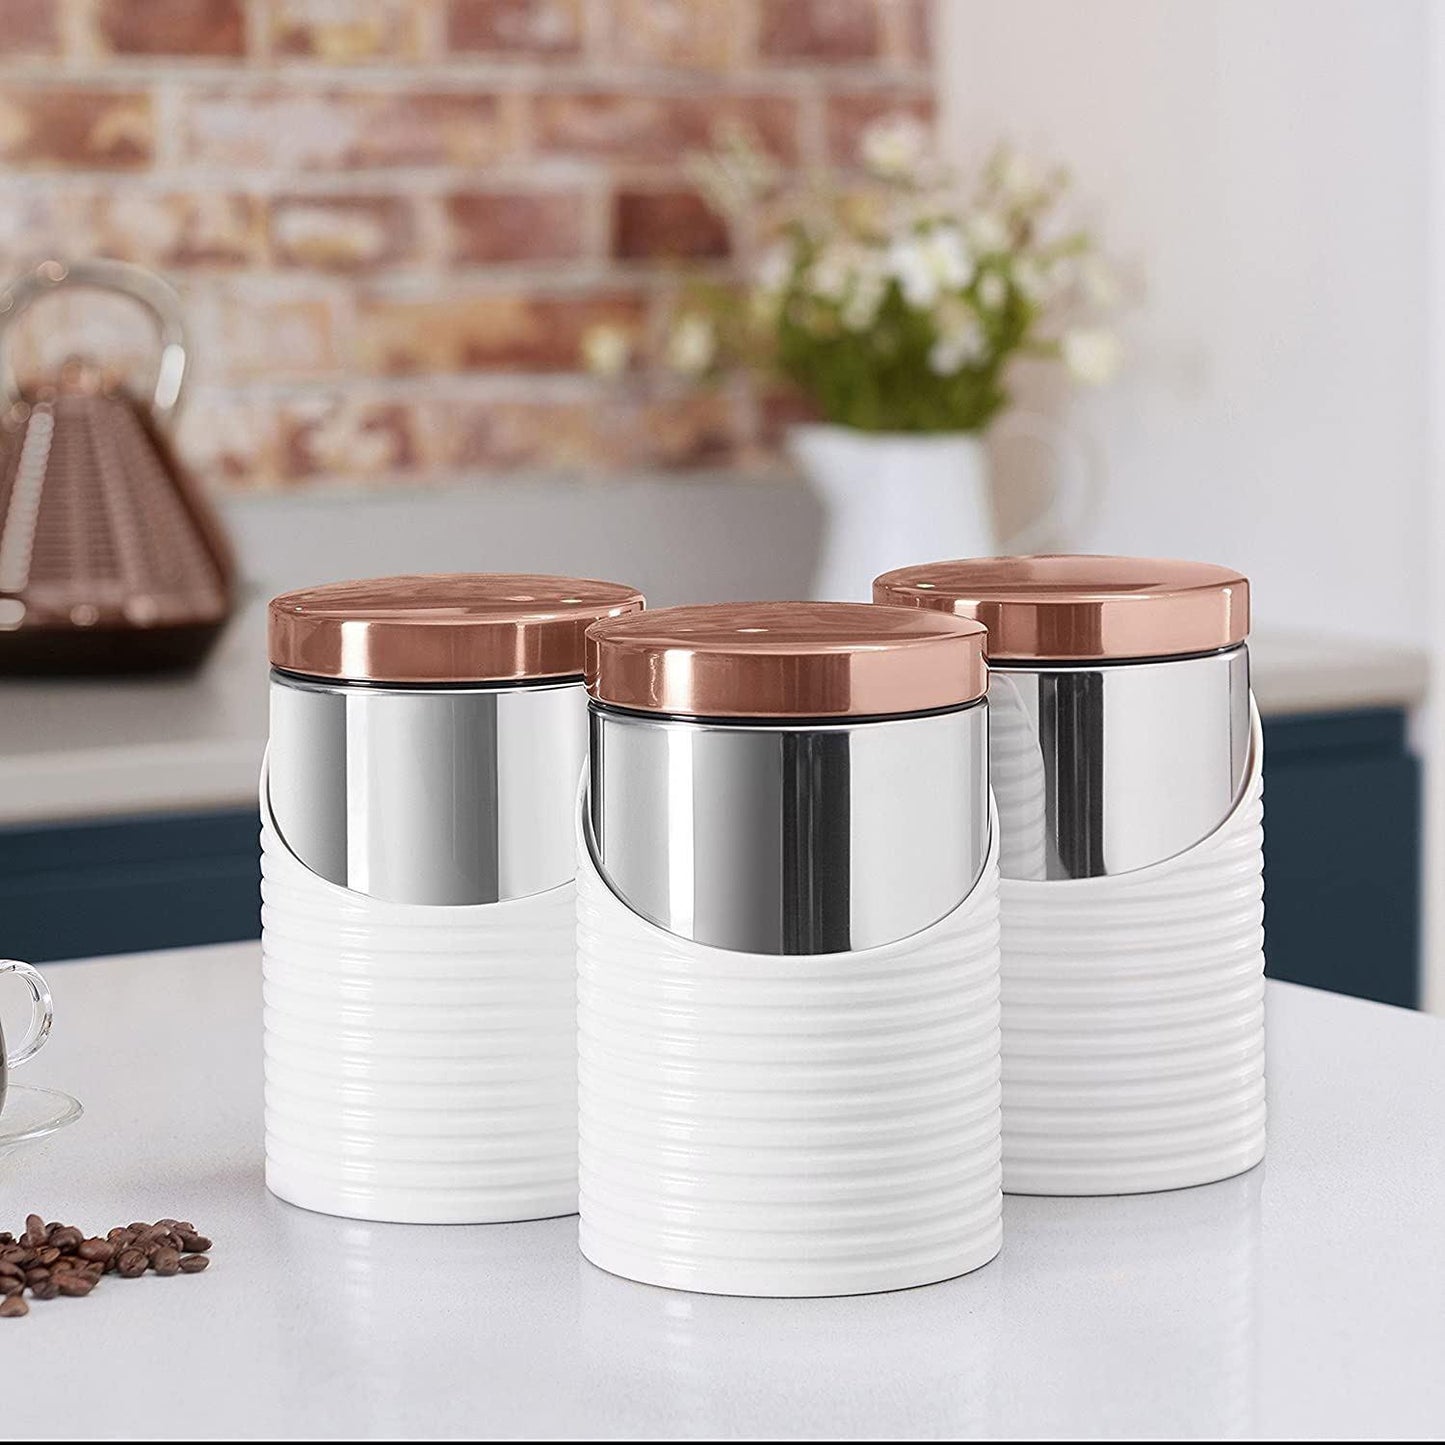 TOWER Linear Stainless Steel White/Rose Gold, 11.6 x 11.6 x 17 cm, Set of 3 Canisters T826001RW